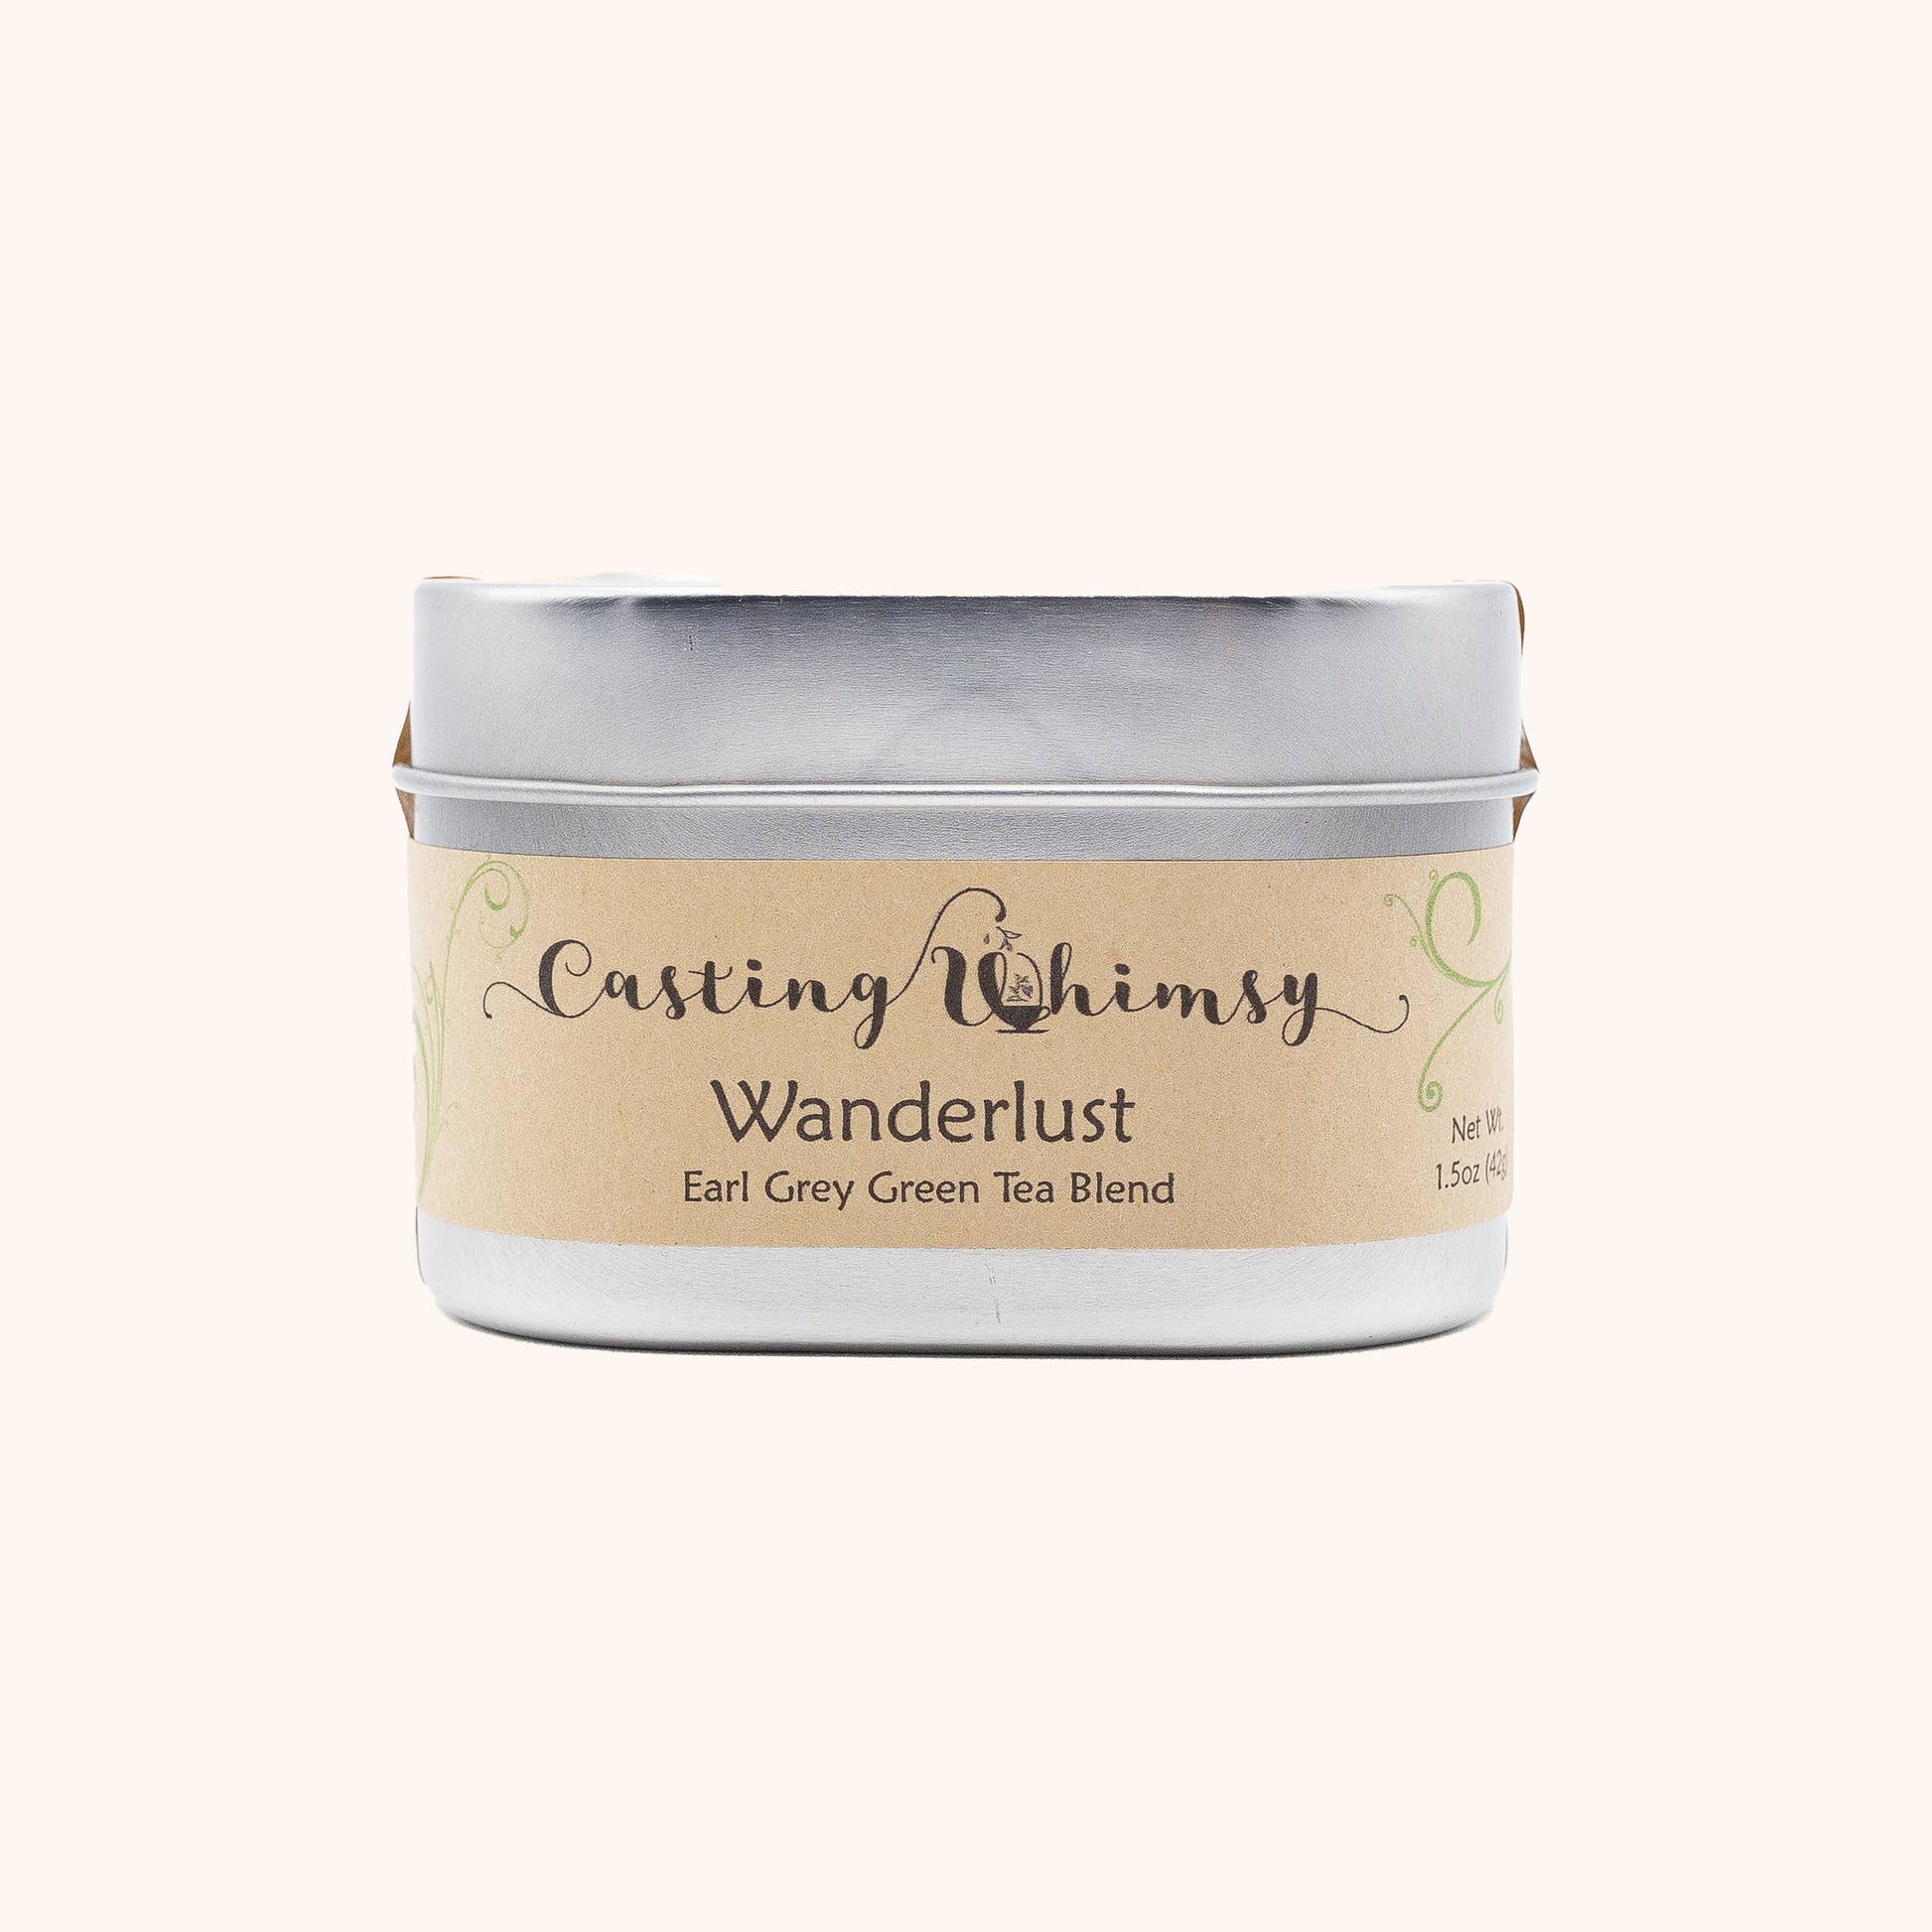 Wanderlust by Casting Whimsy tea tin